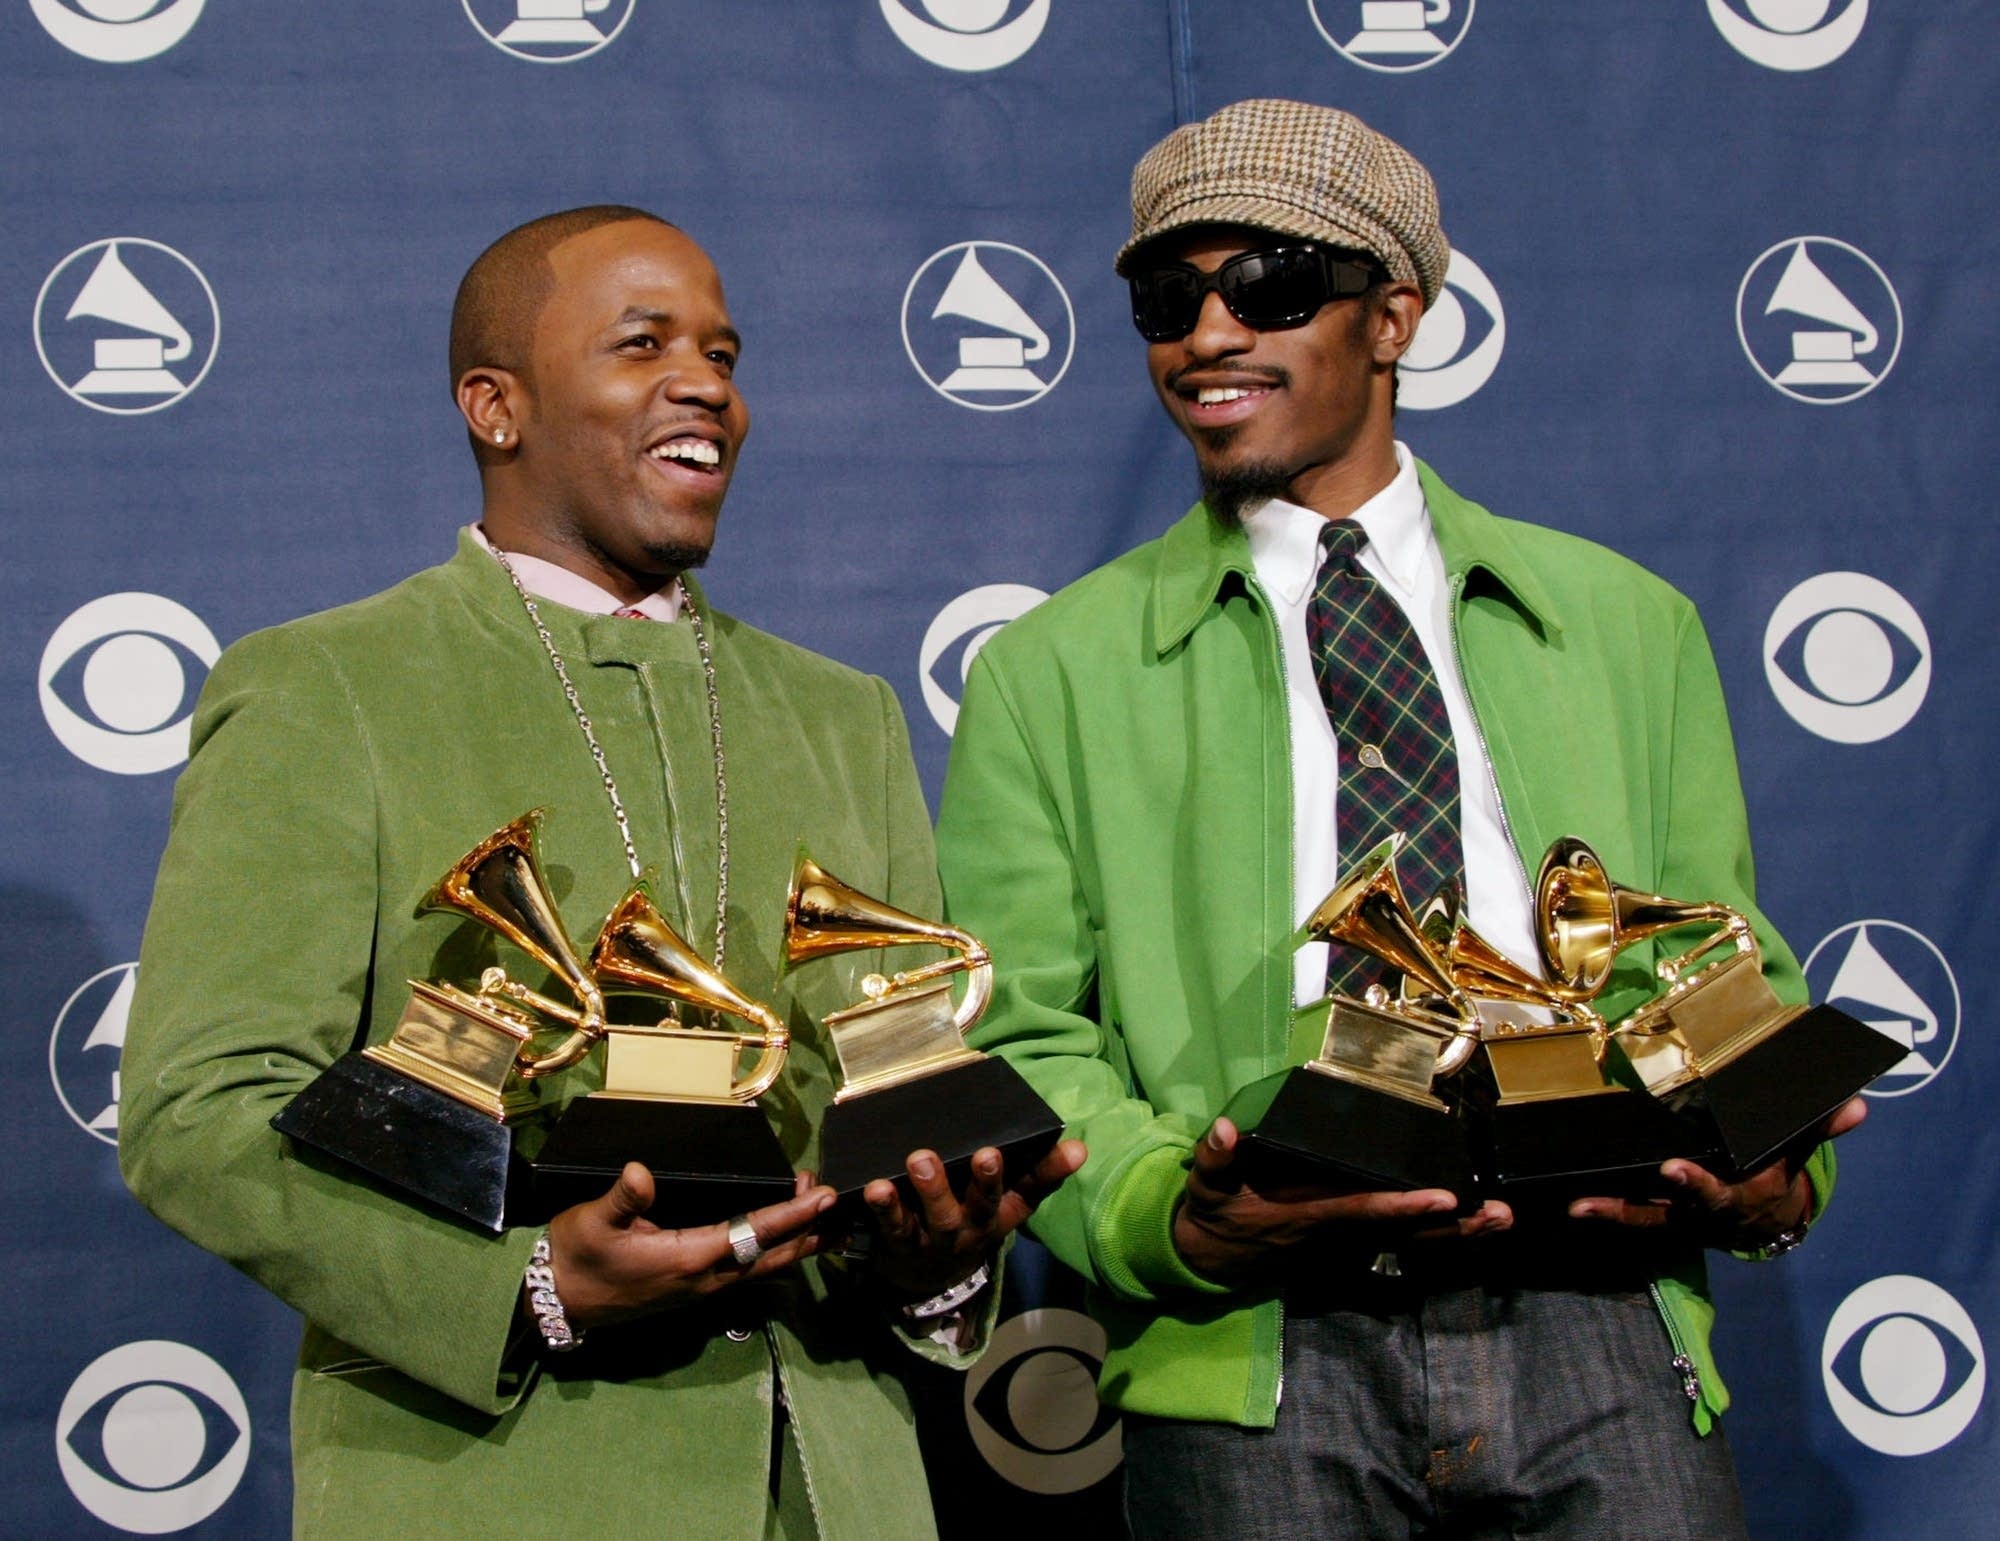 OutKast, Music group, Feb 8 in music history, Album of the year, 2000x1550 HD Desktop